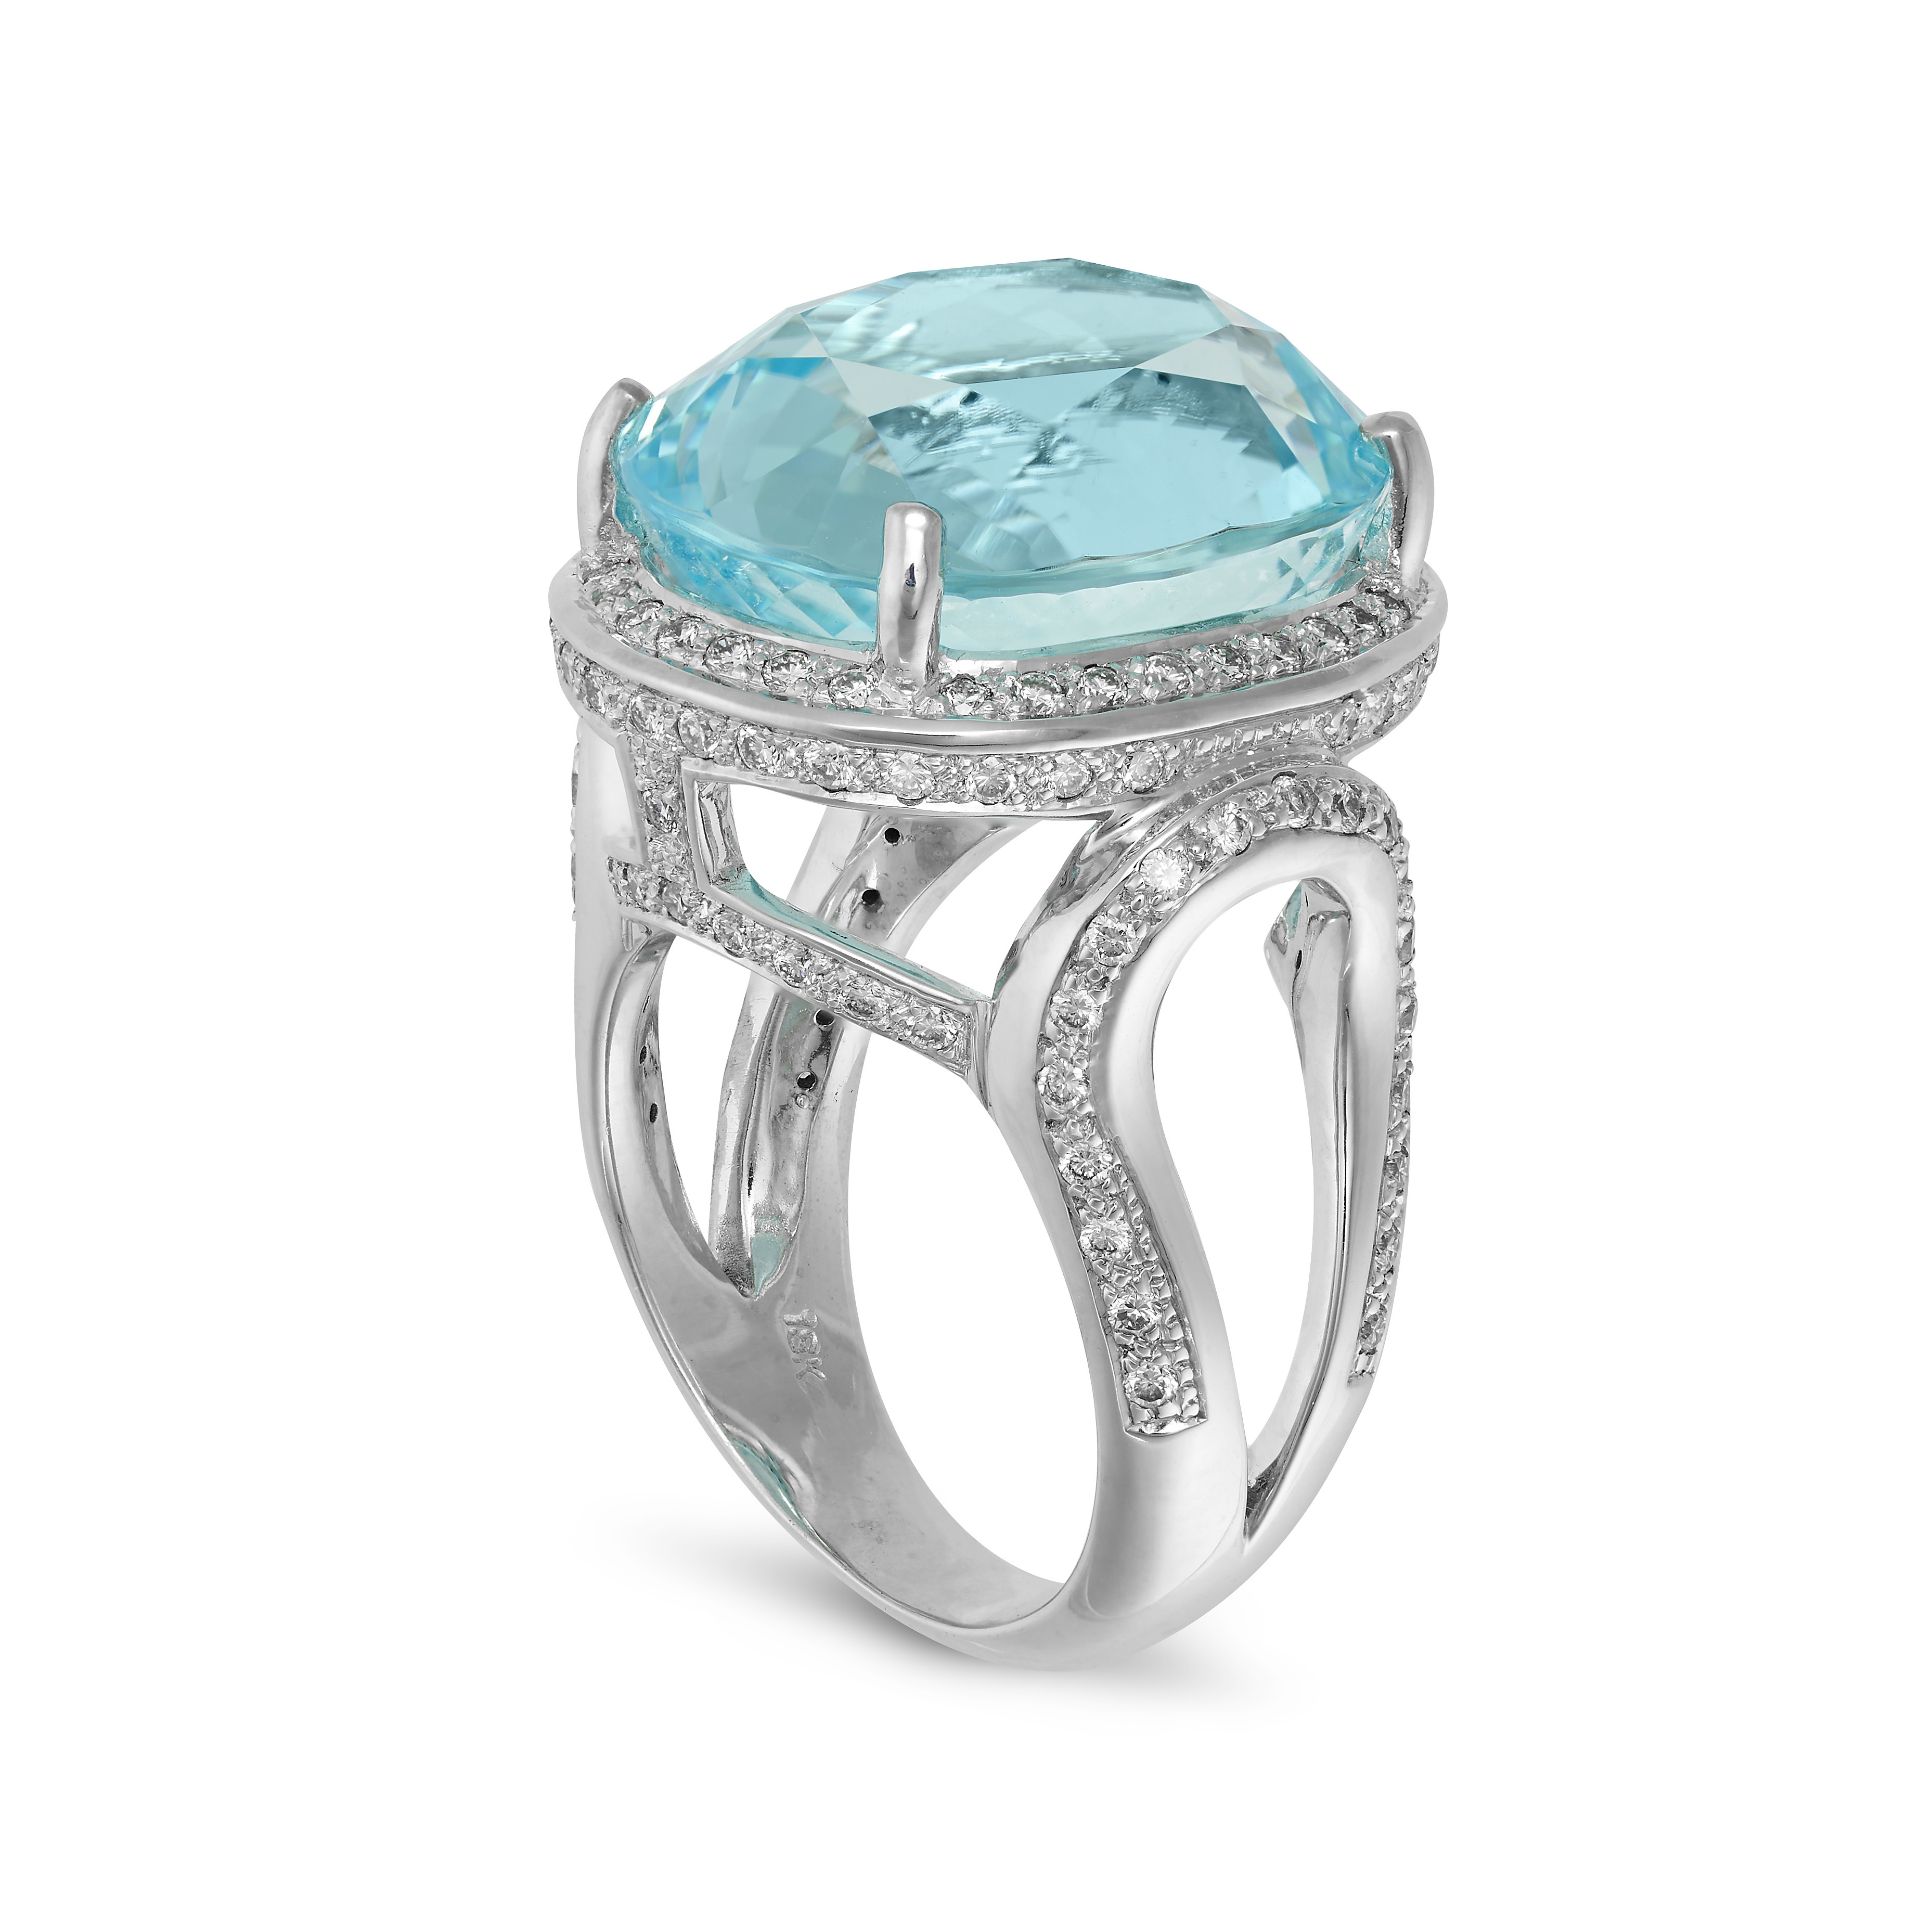 A PARAIBA TOURMALINE AND DIAMOND RING in 18ct white gold, set with an oval cut Paraiba tourmaline... - Image 2 of 2